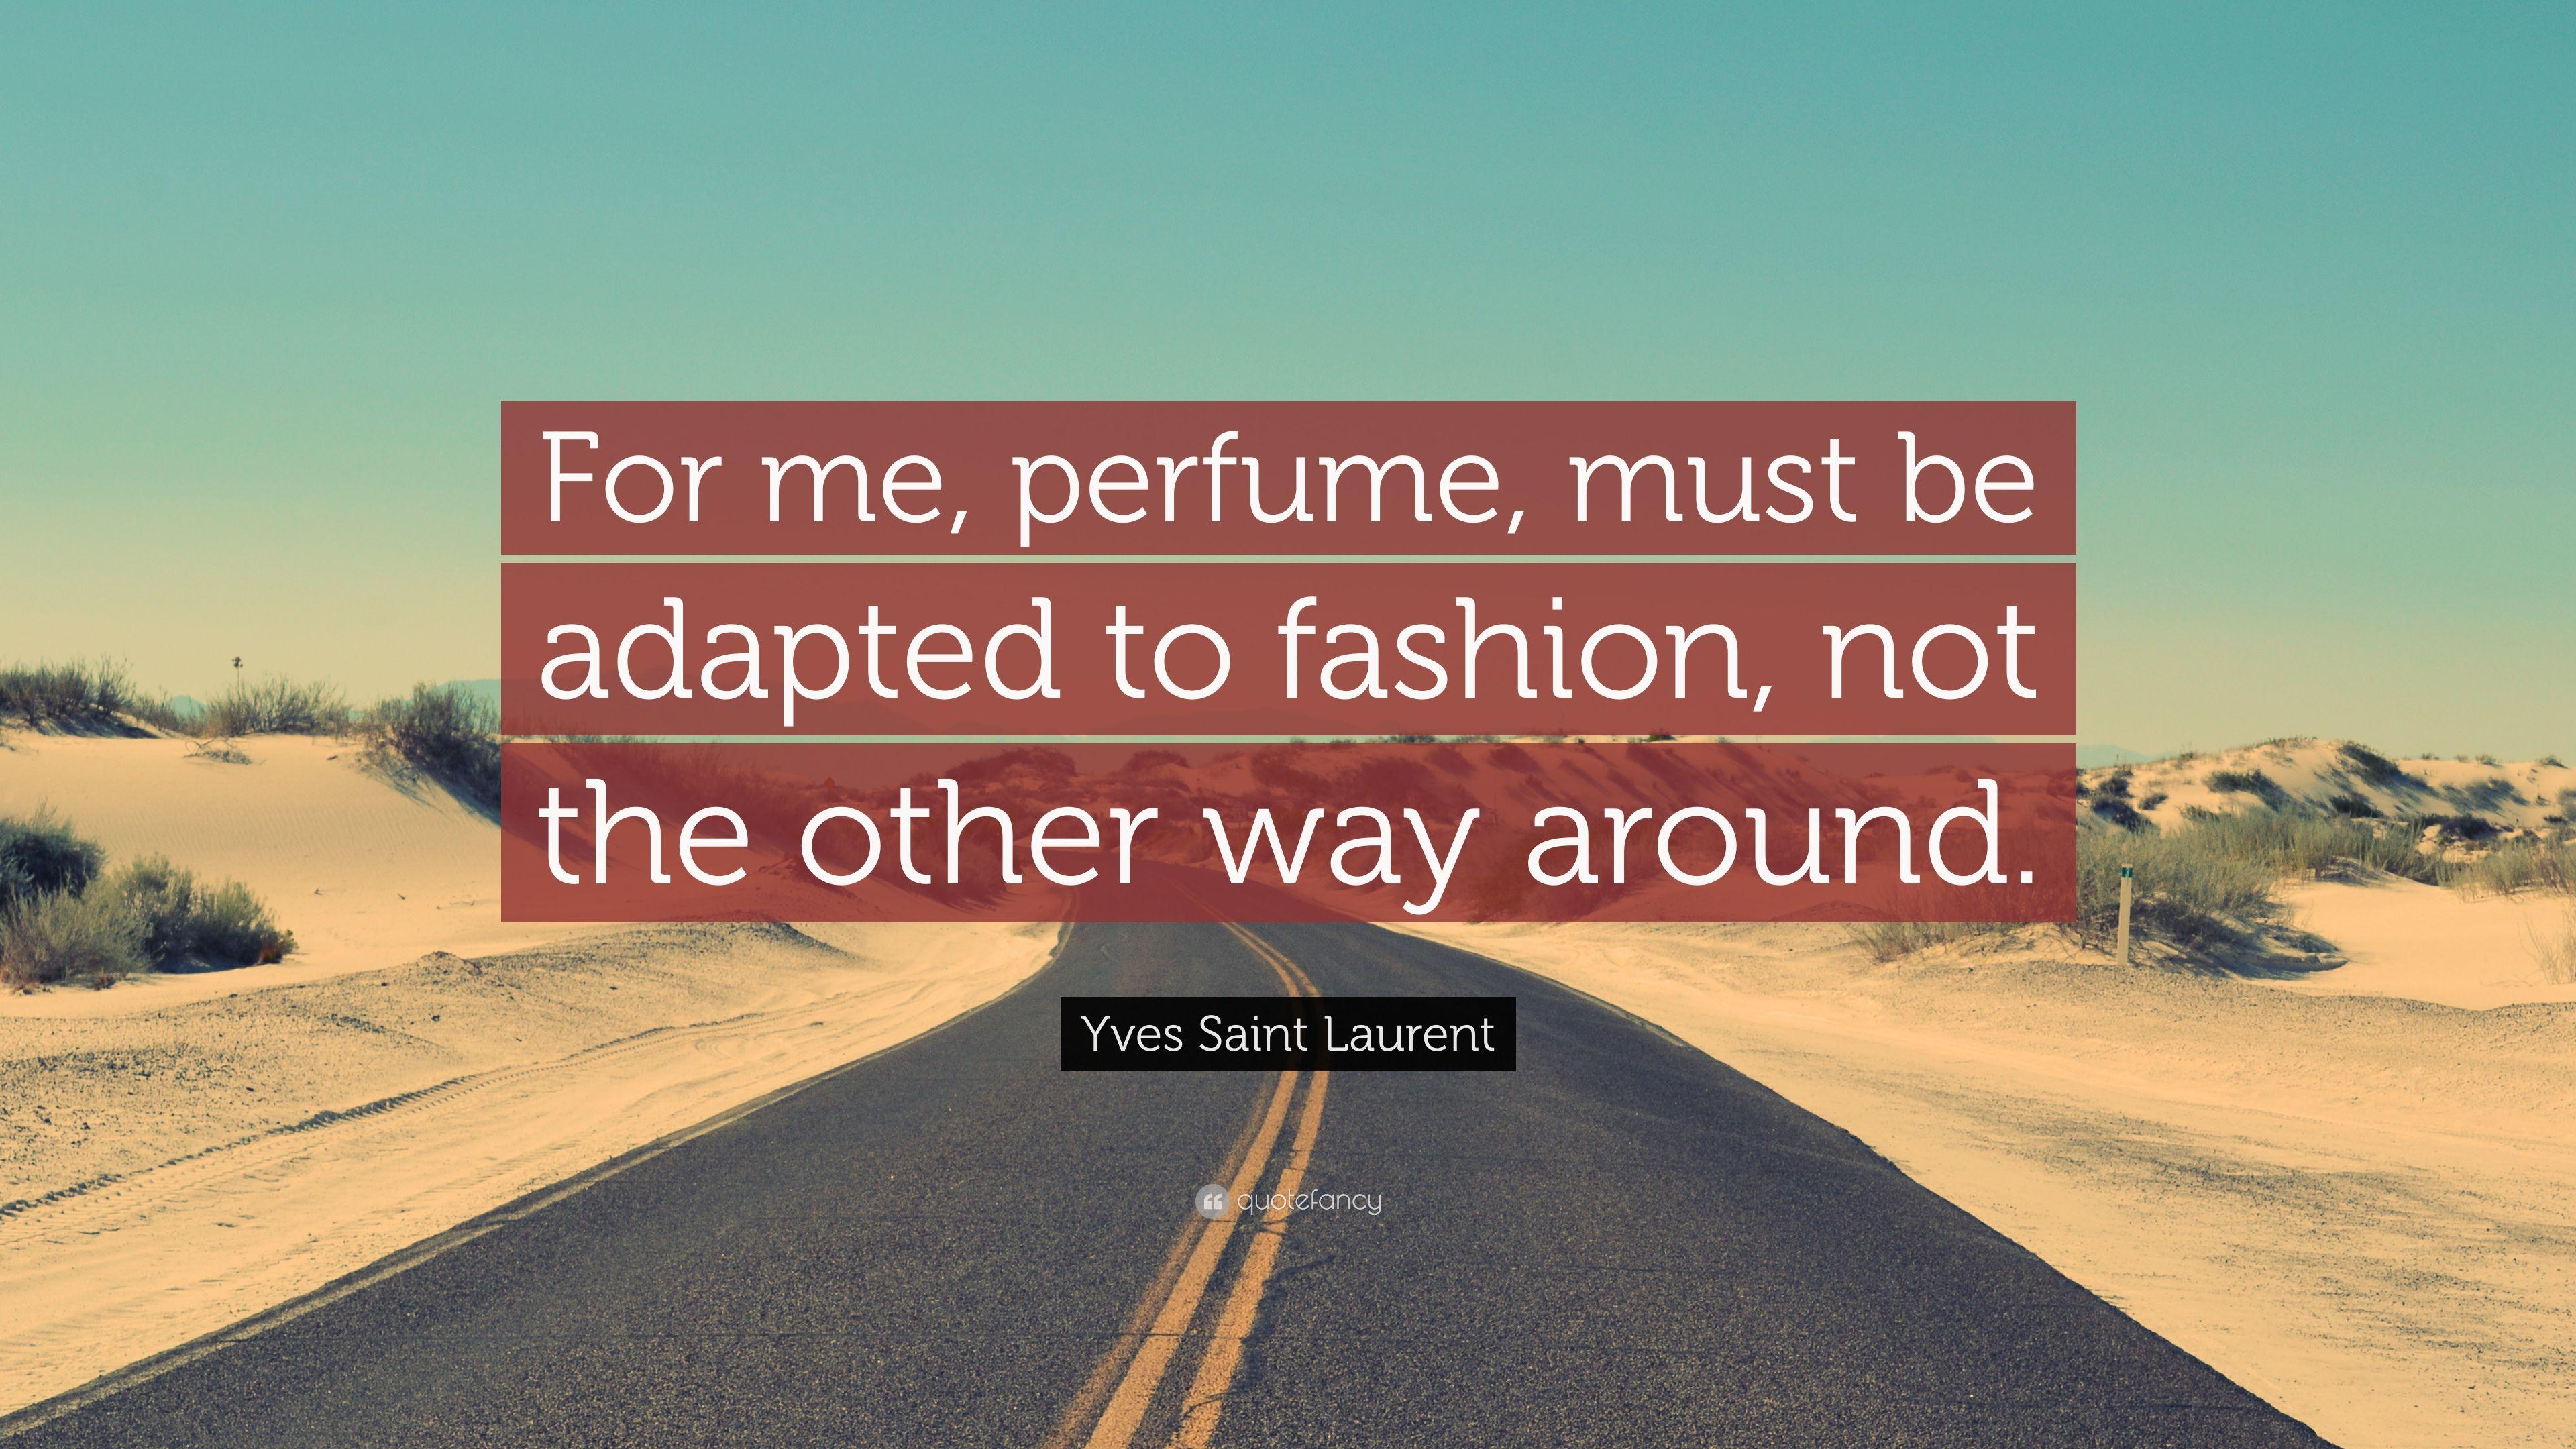 Yves Saint Laurent Quote: “For me, perfume, must be adapted to